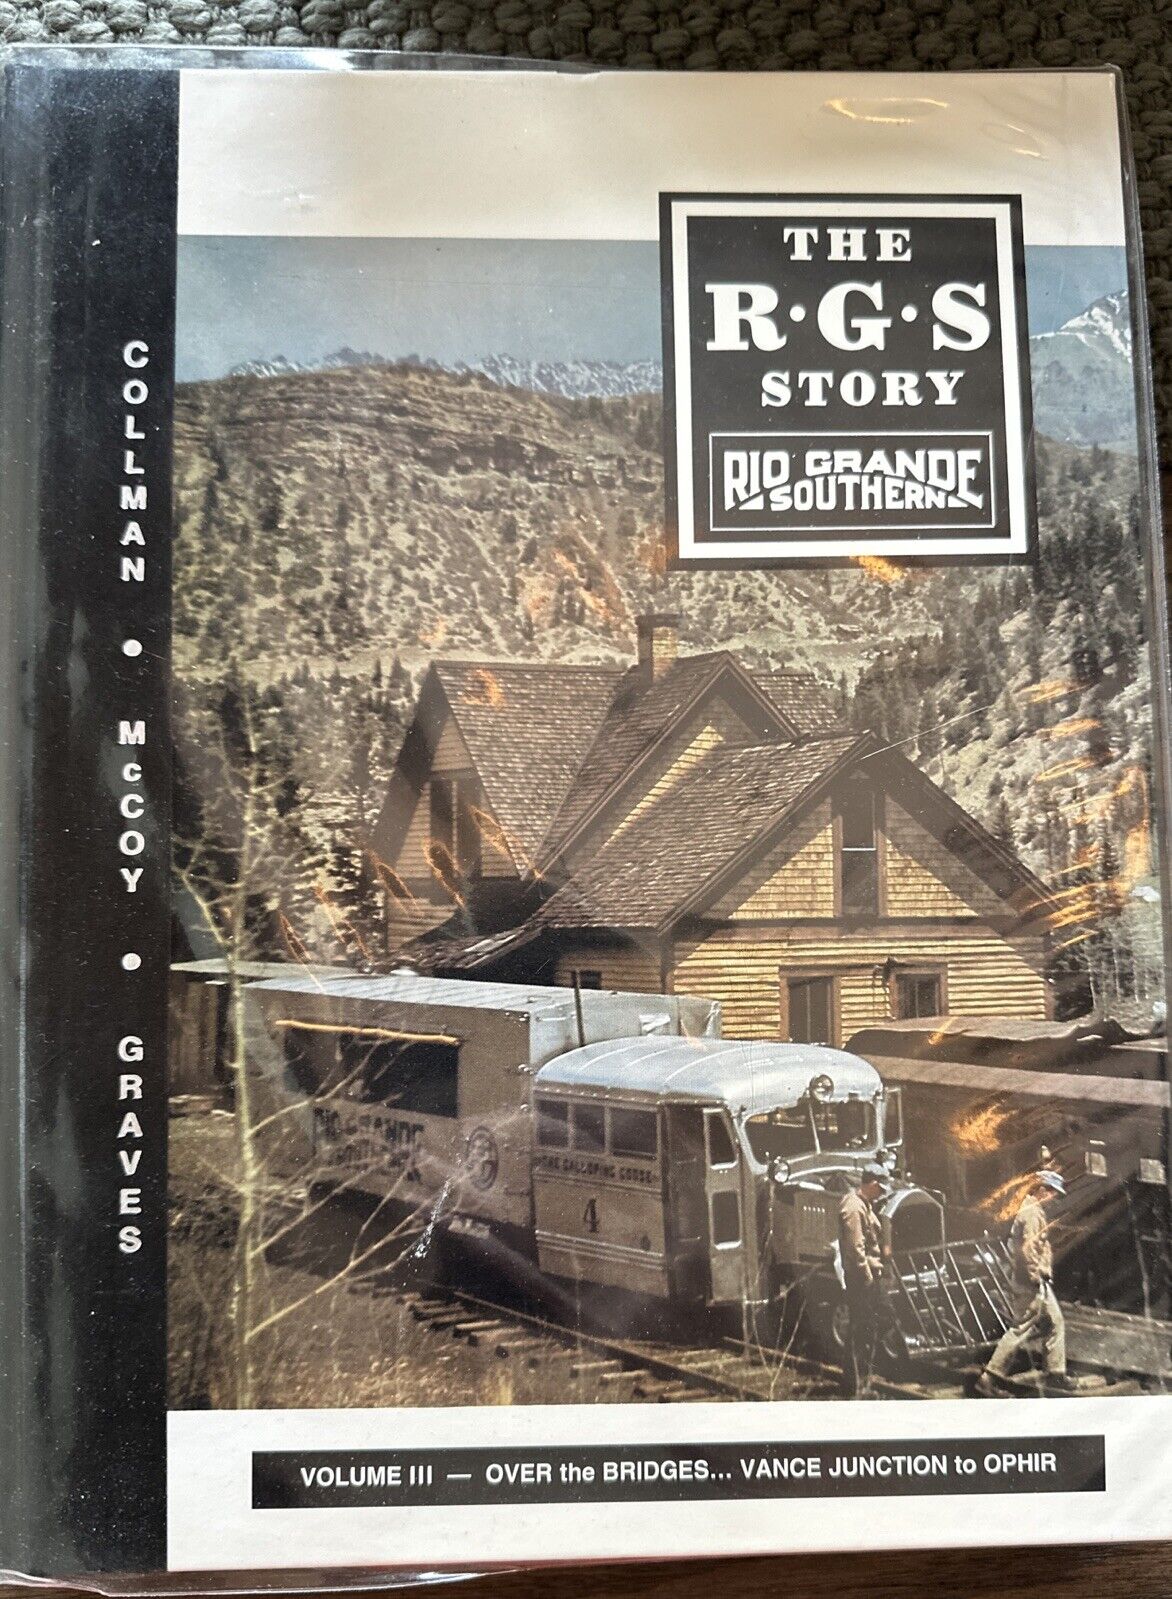 The R G S Story Volume III Over the Bridges..Vance Junction to Ophir Signed Copy